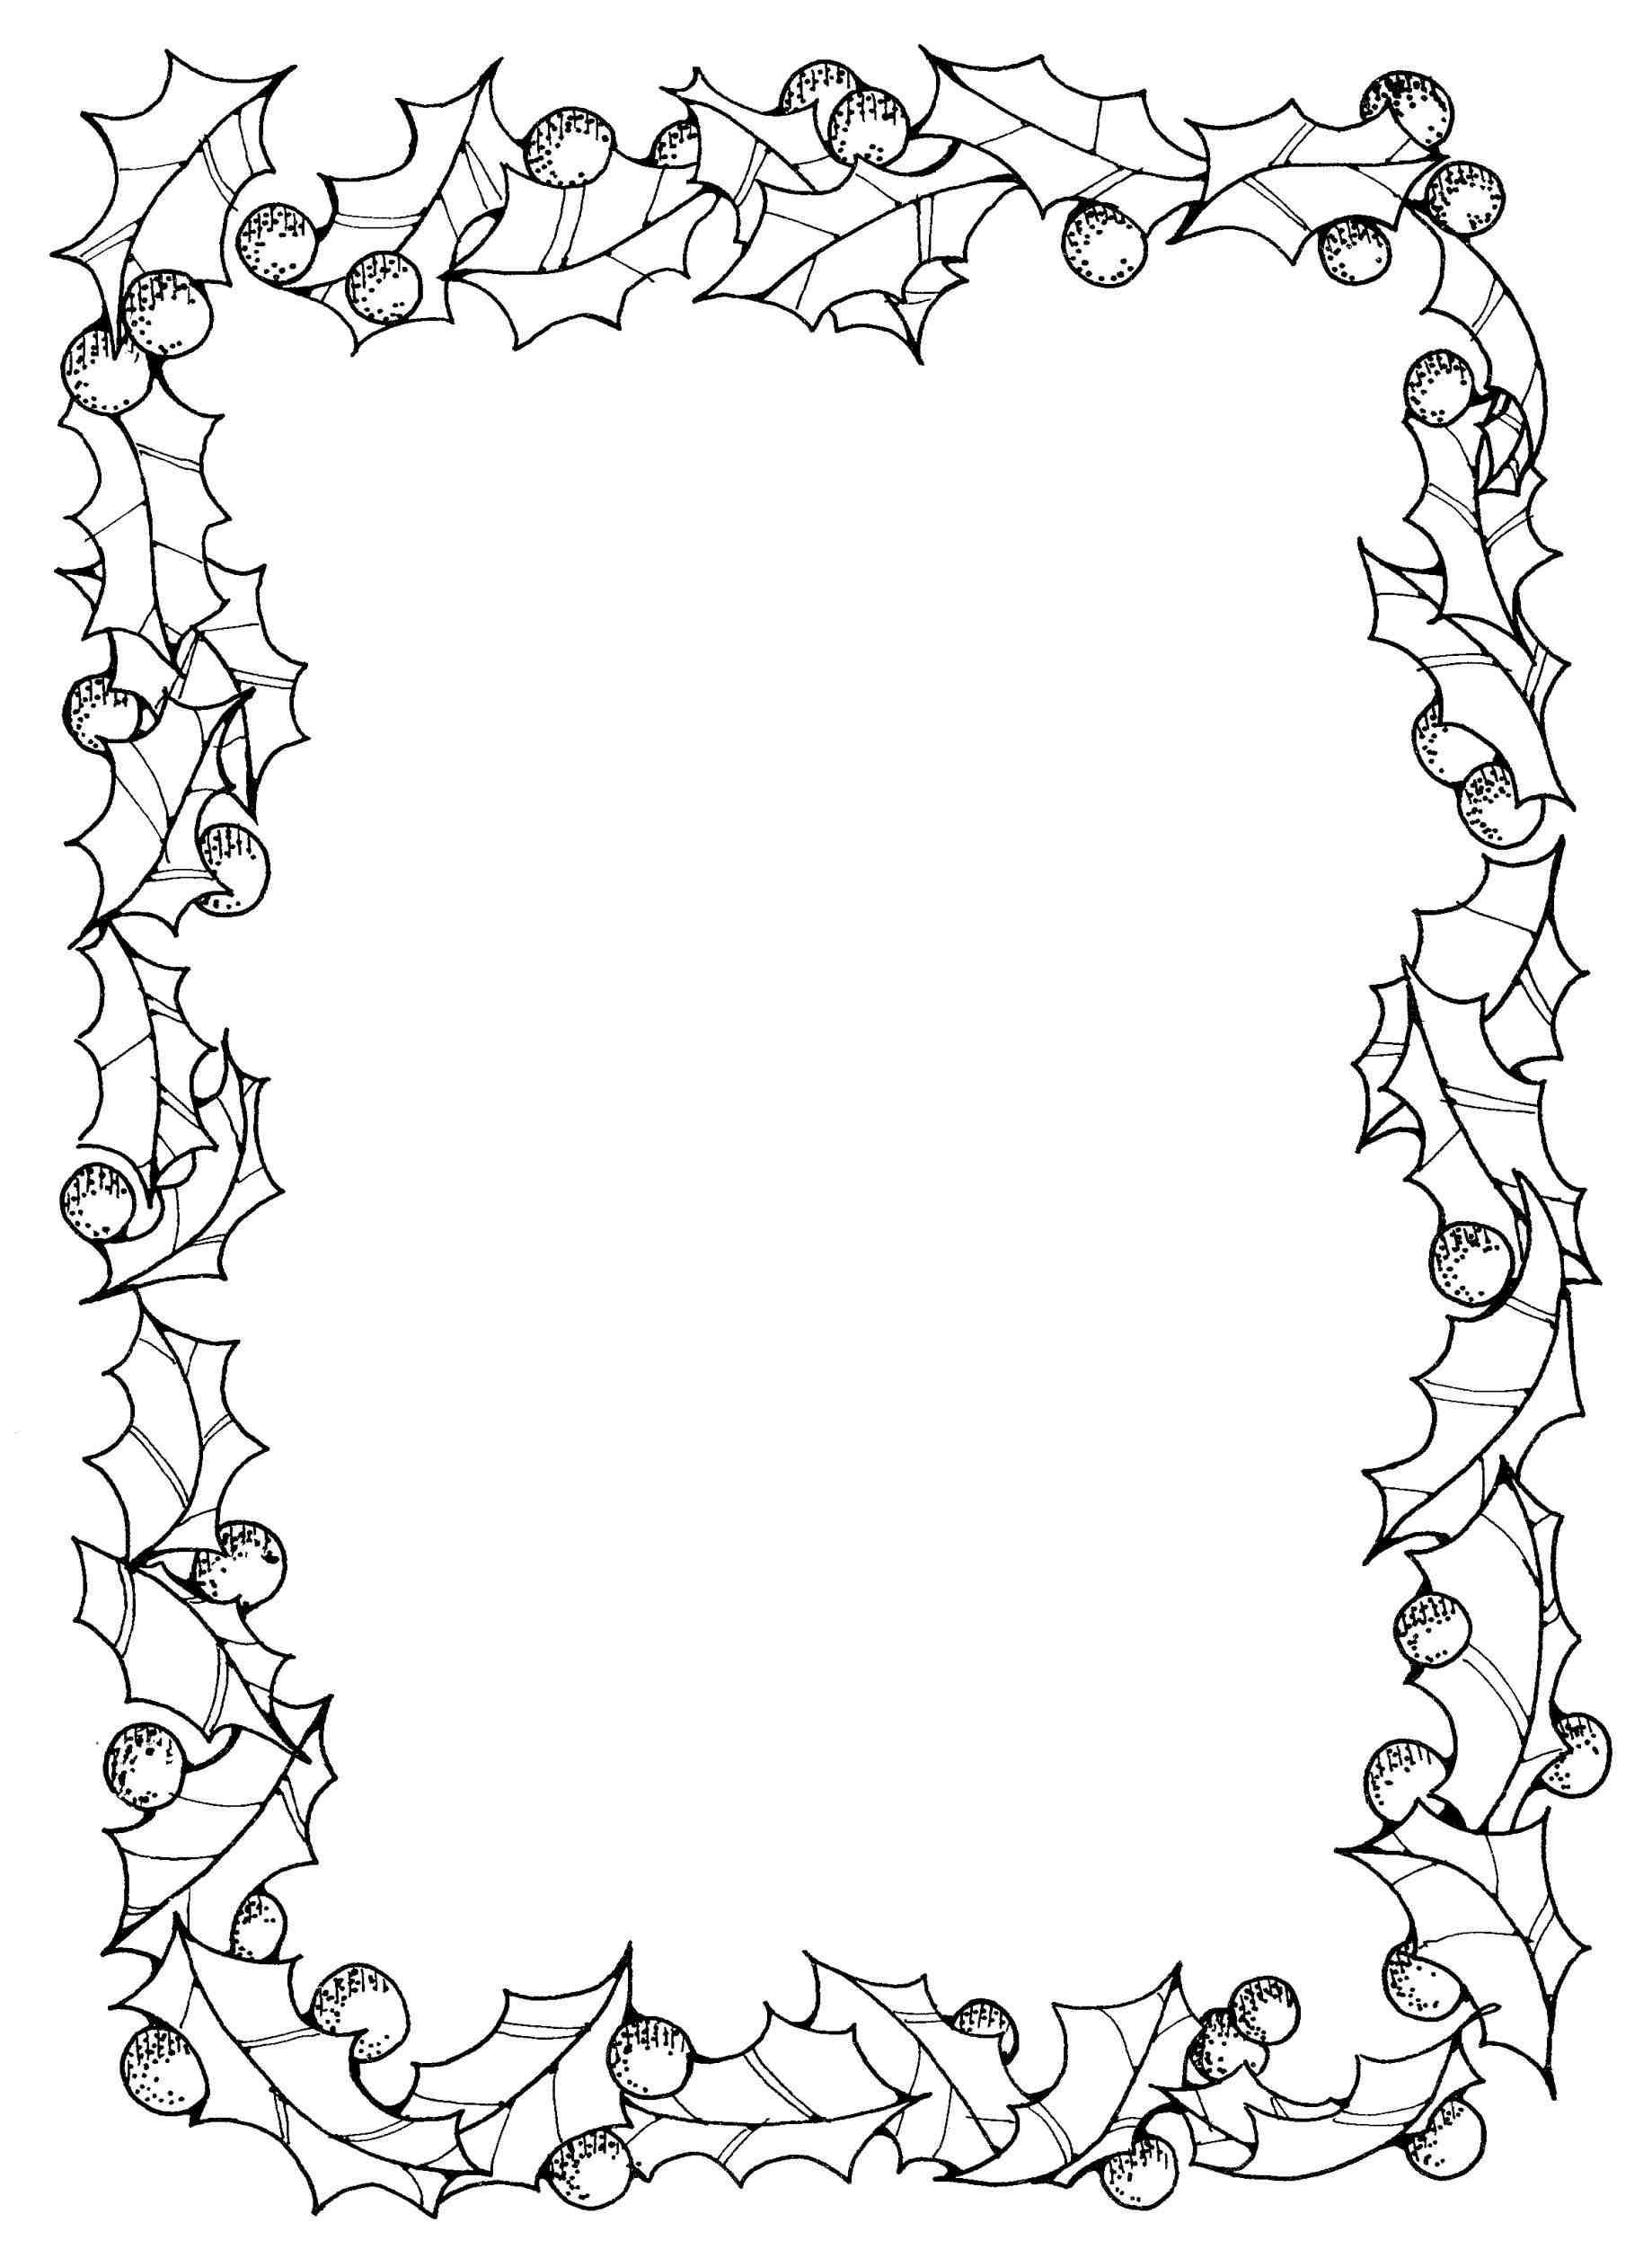 1353 Divider free clipart.